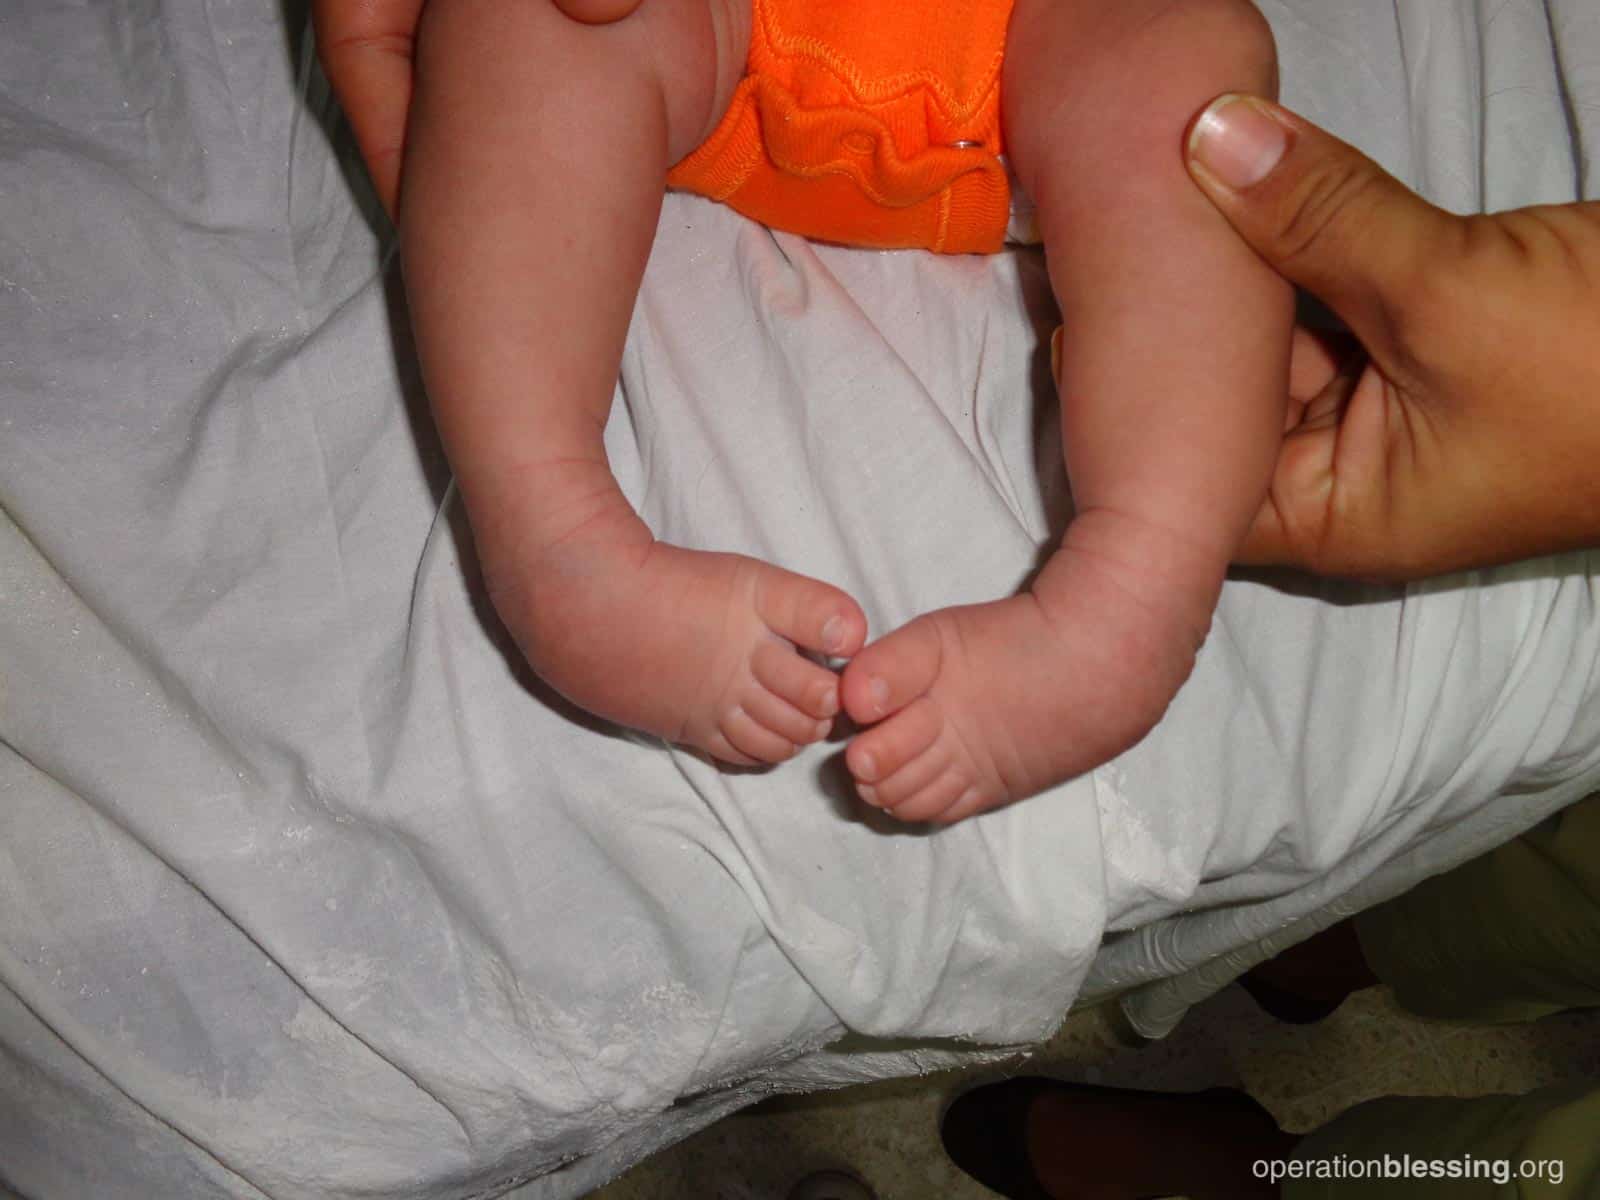 Free Clubfoot Treatment for Baby in Need - Operation Blessing